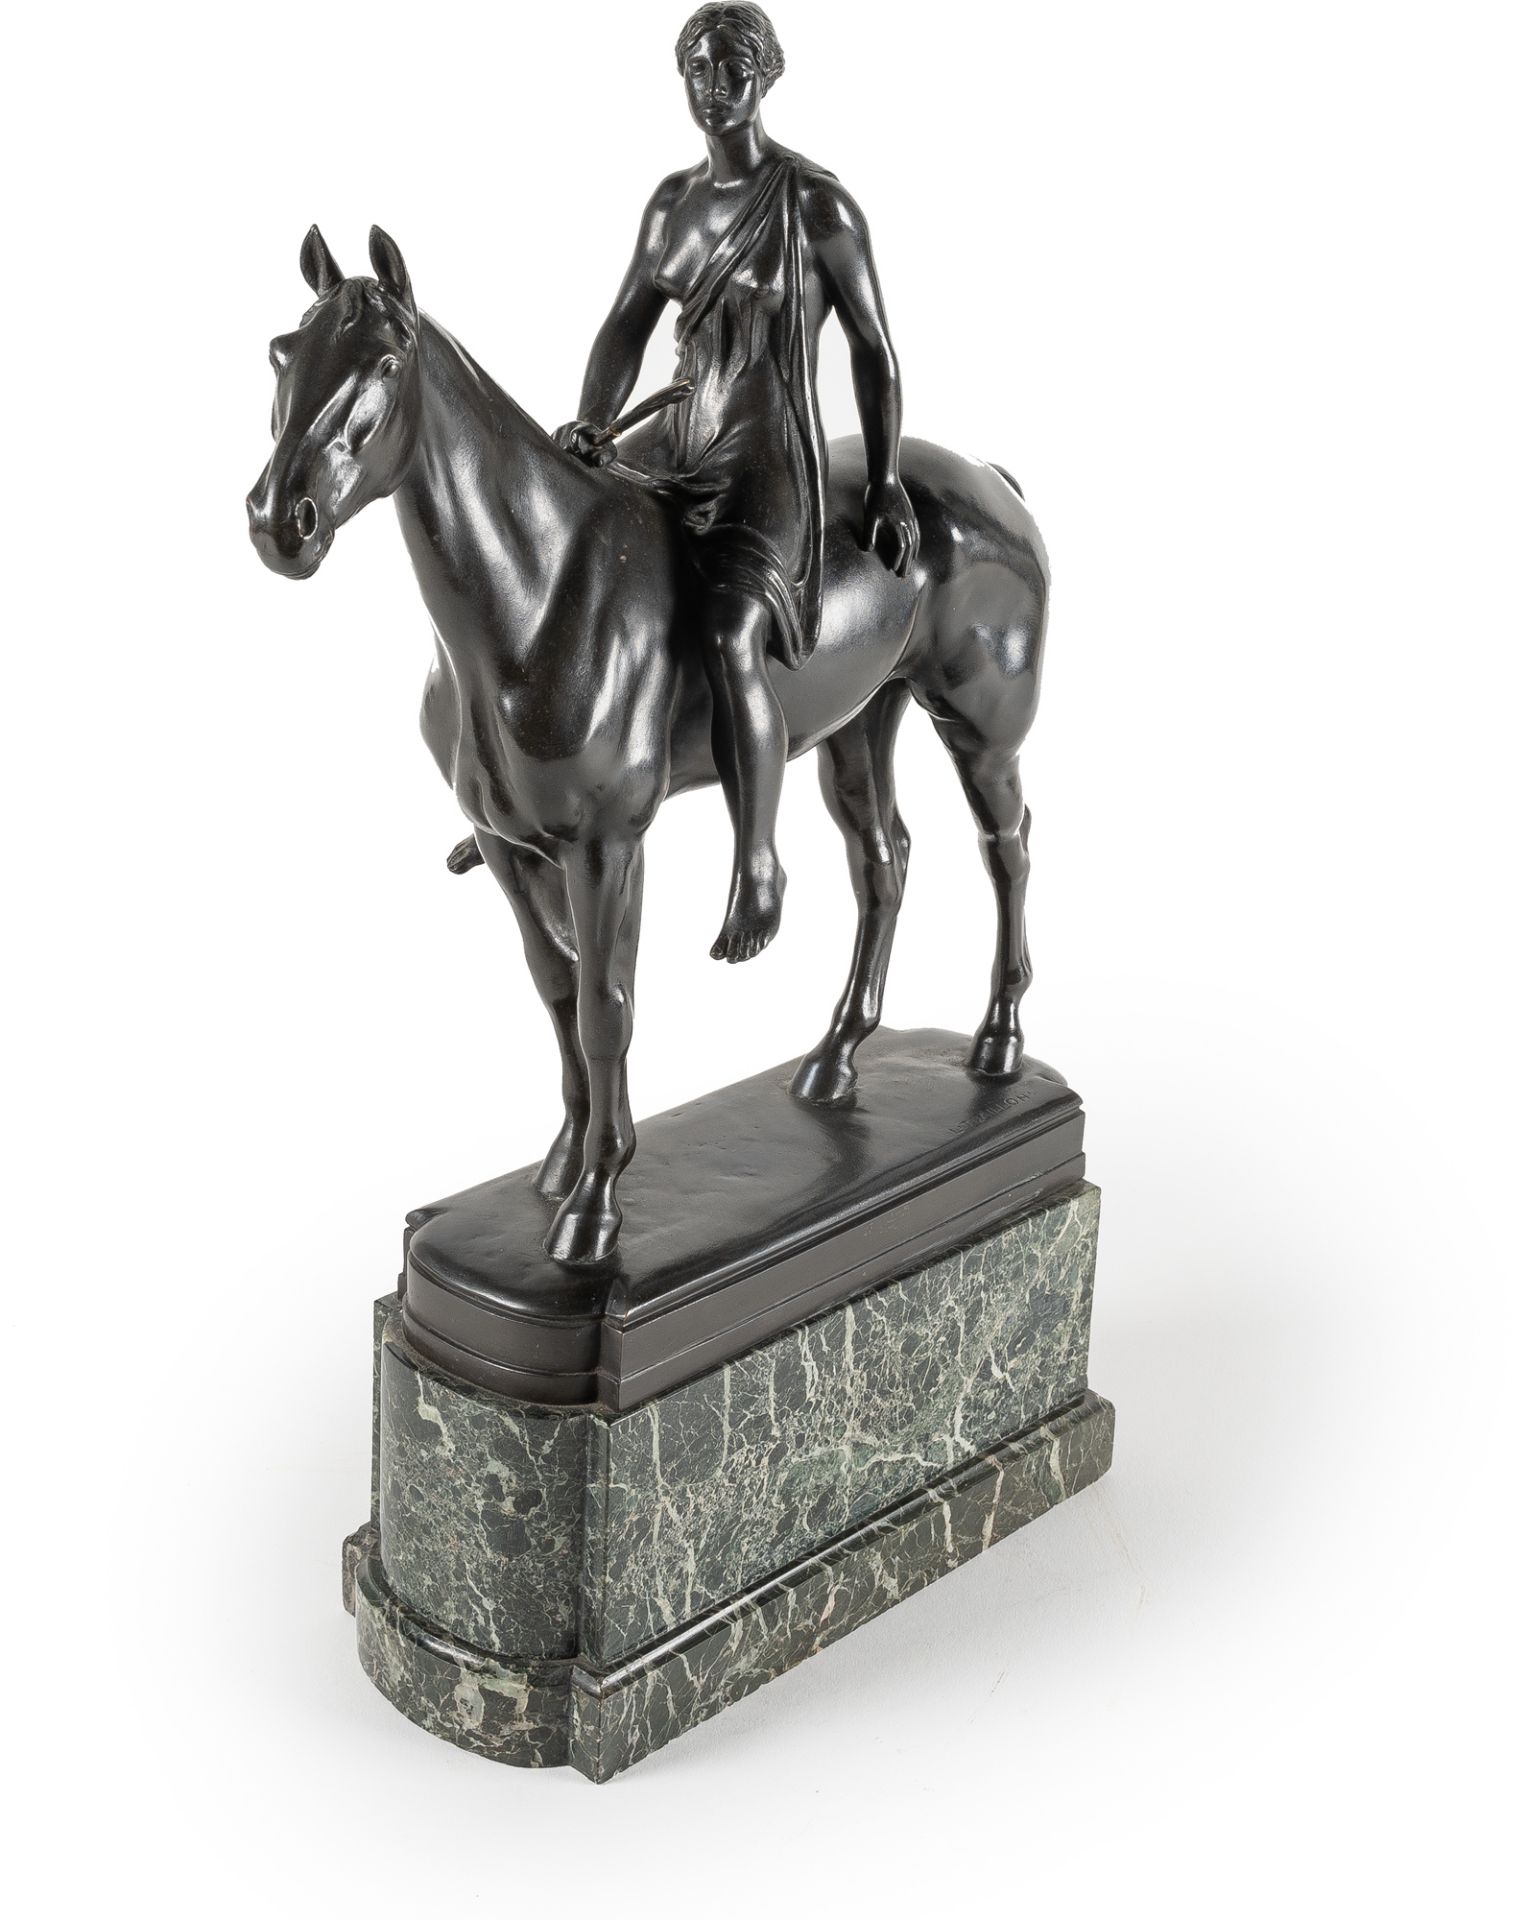 Louis Tuaillon (1862 - Berlin - 1919), AmazonBronze with black patina, on a marble plinth. (After